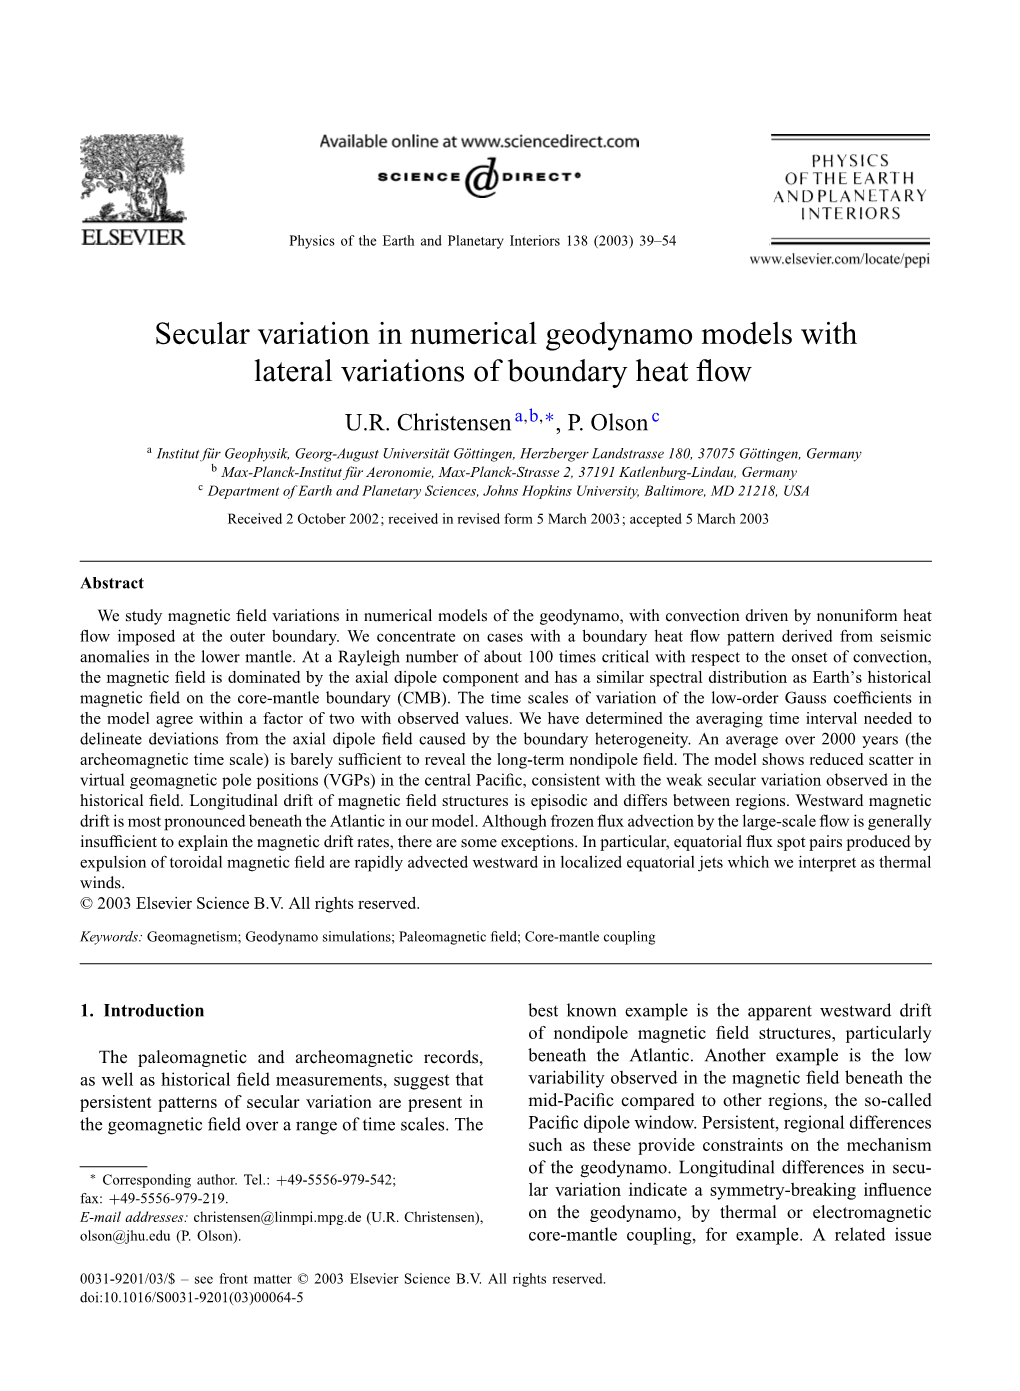 Secular Variation in Numerical Geodynamo Models with Lateral Variations of Boundary Heat ﬂow U.R